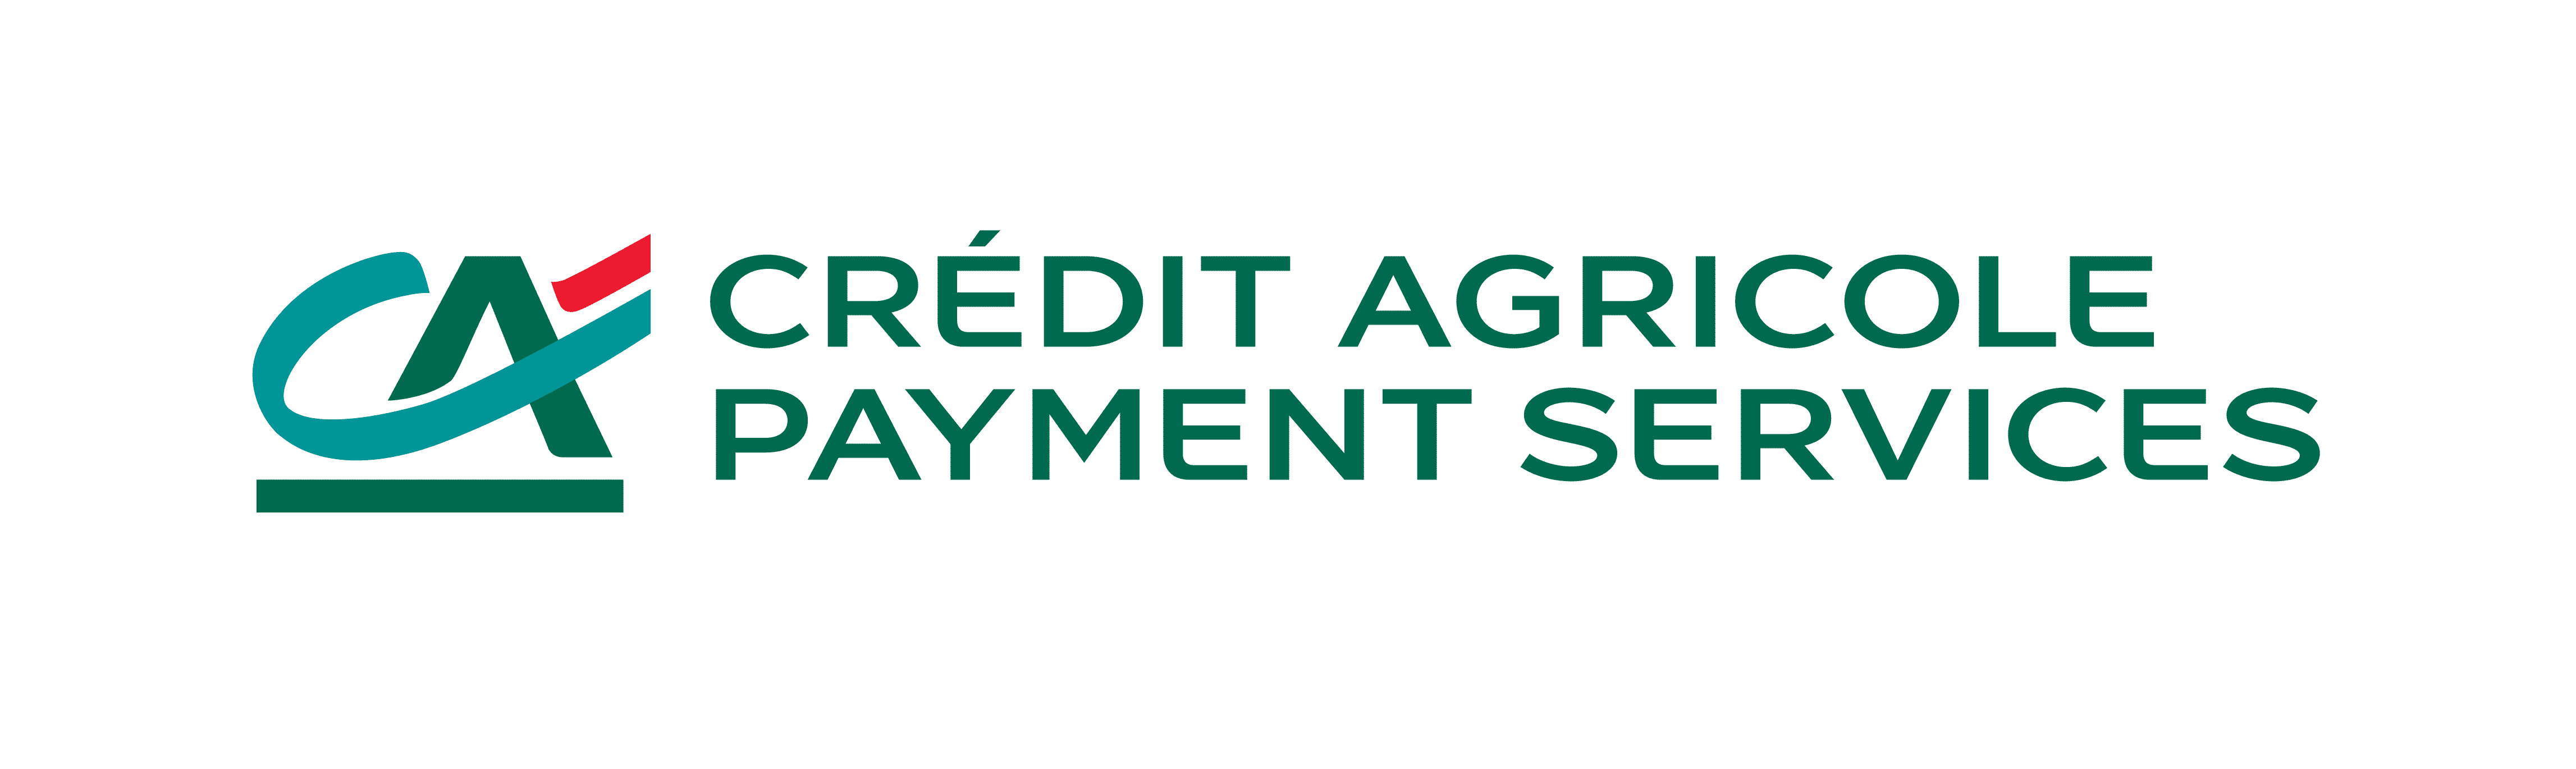 CA payment service